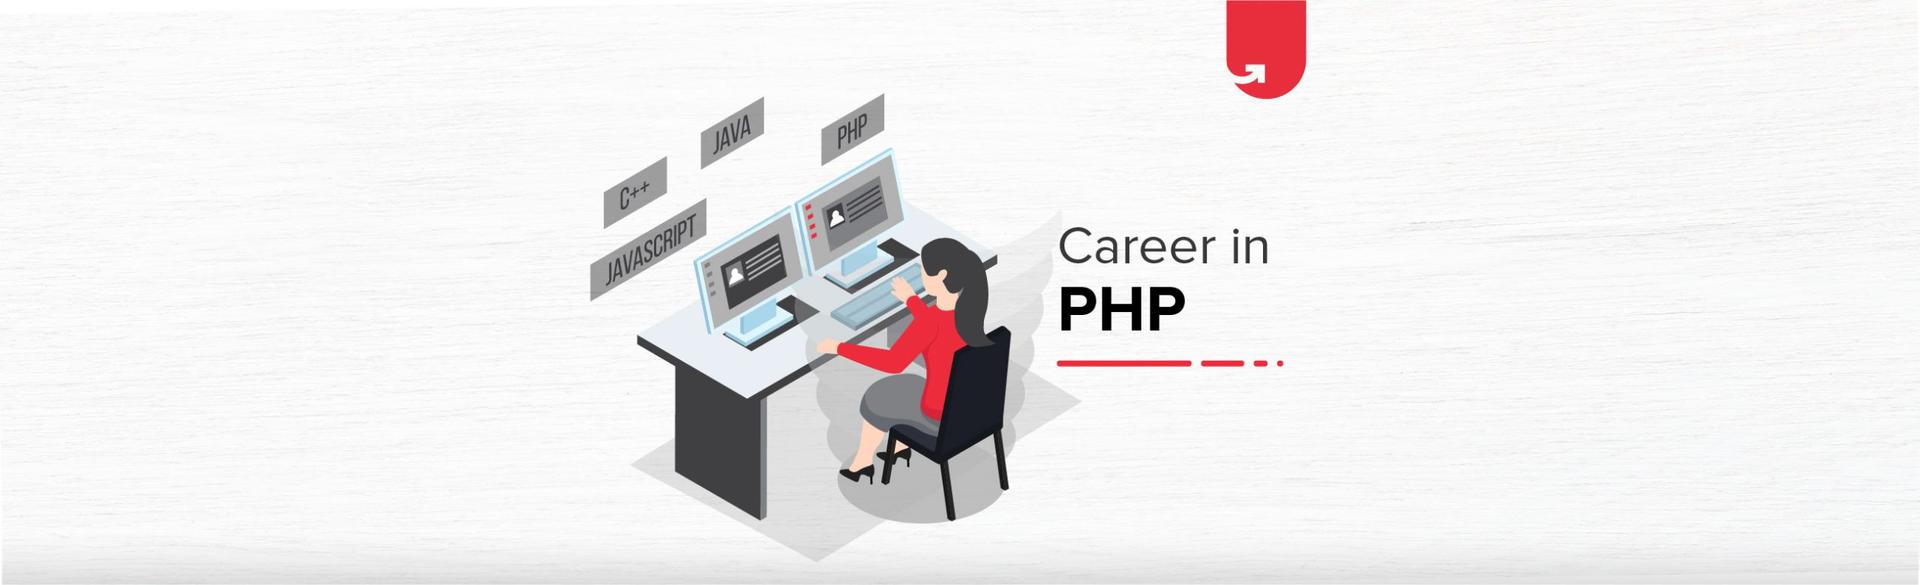 Career Opportunities in PHP [Ultimate Guide]